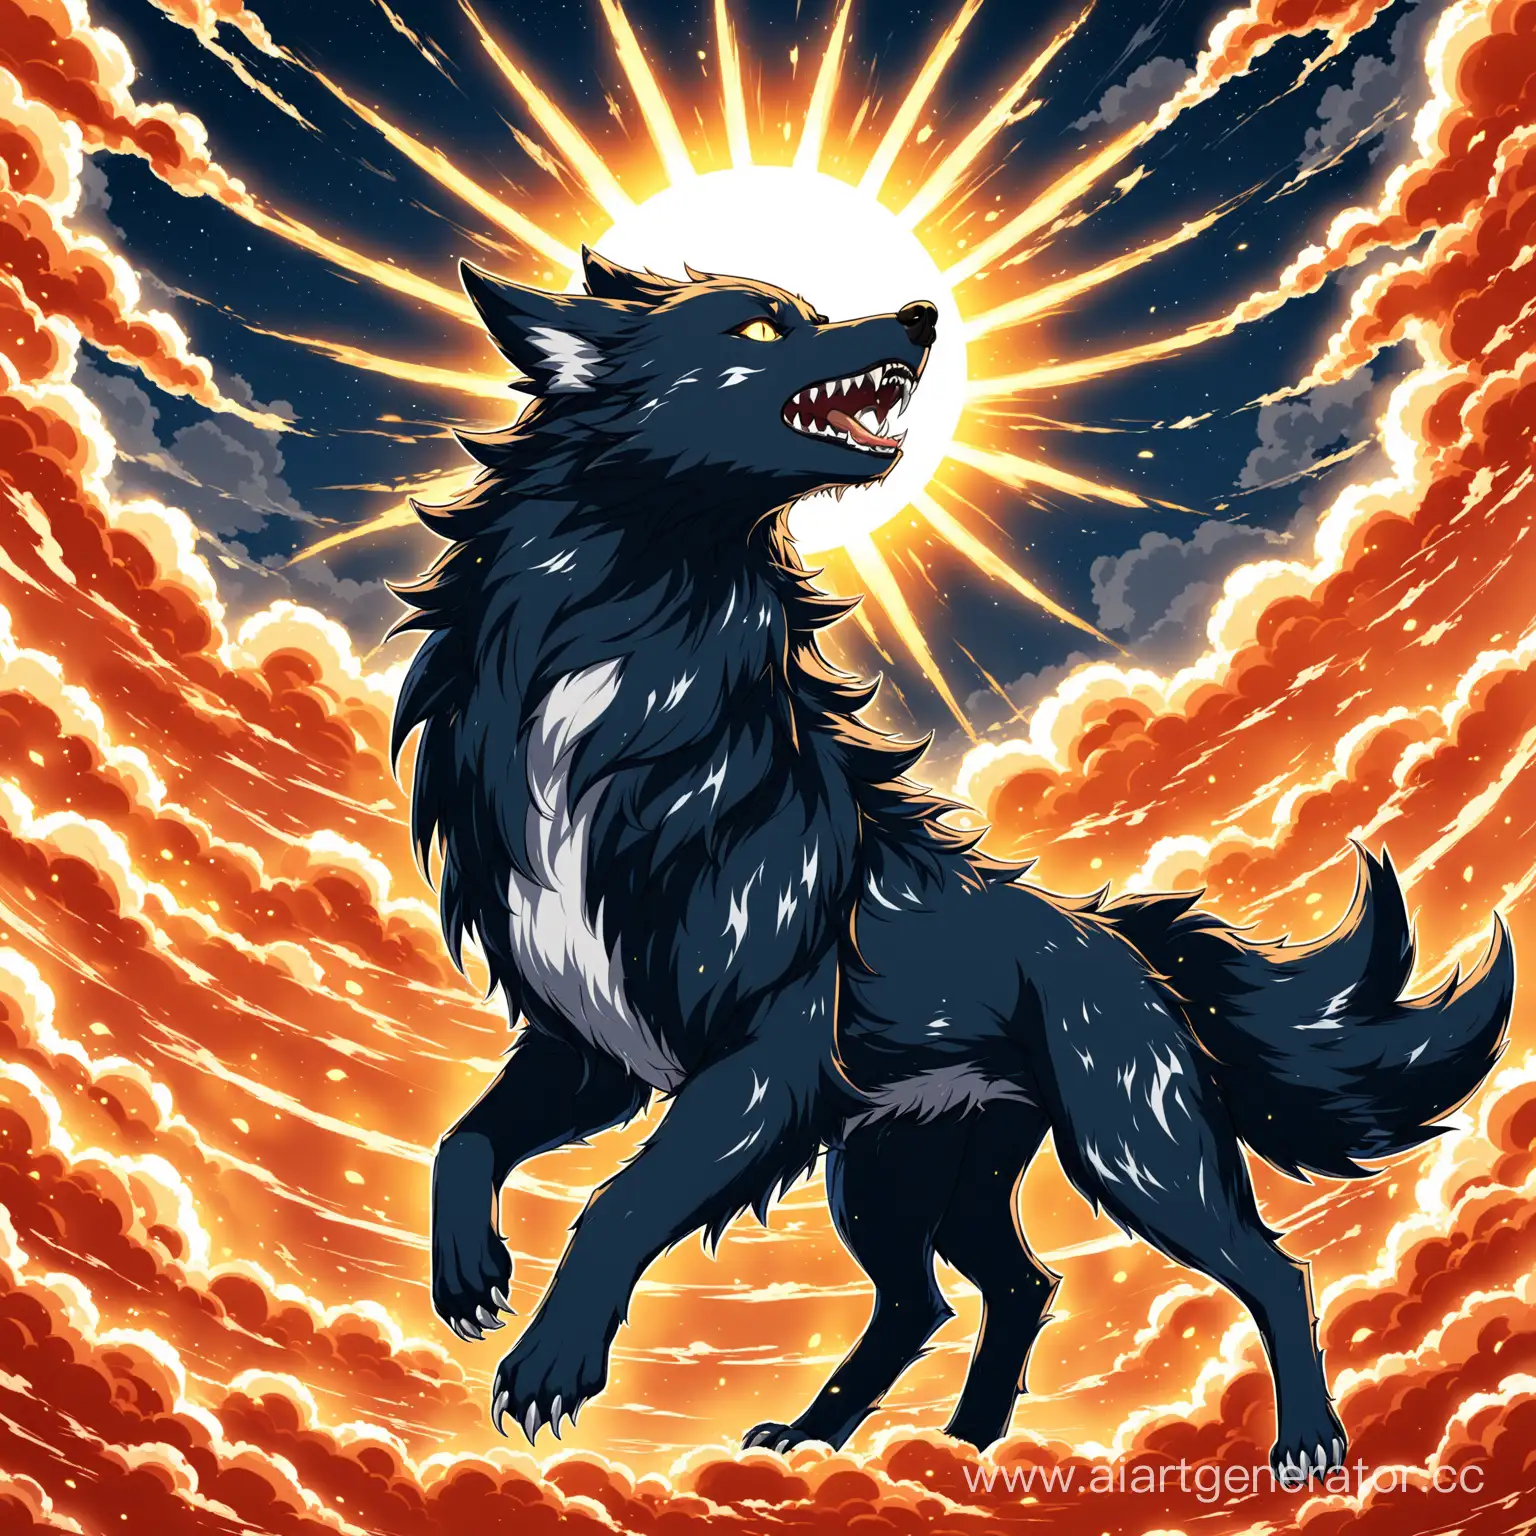 Anime-Style-Fenrir-Devouring-Meat-under-Sun-Rays-with-Fur-Blowing-in-the-Wind